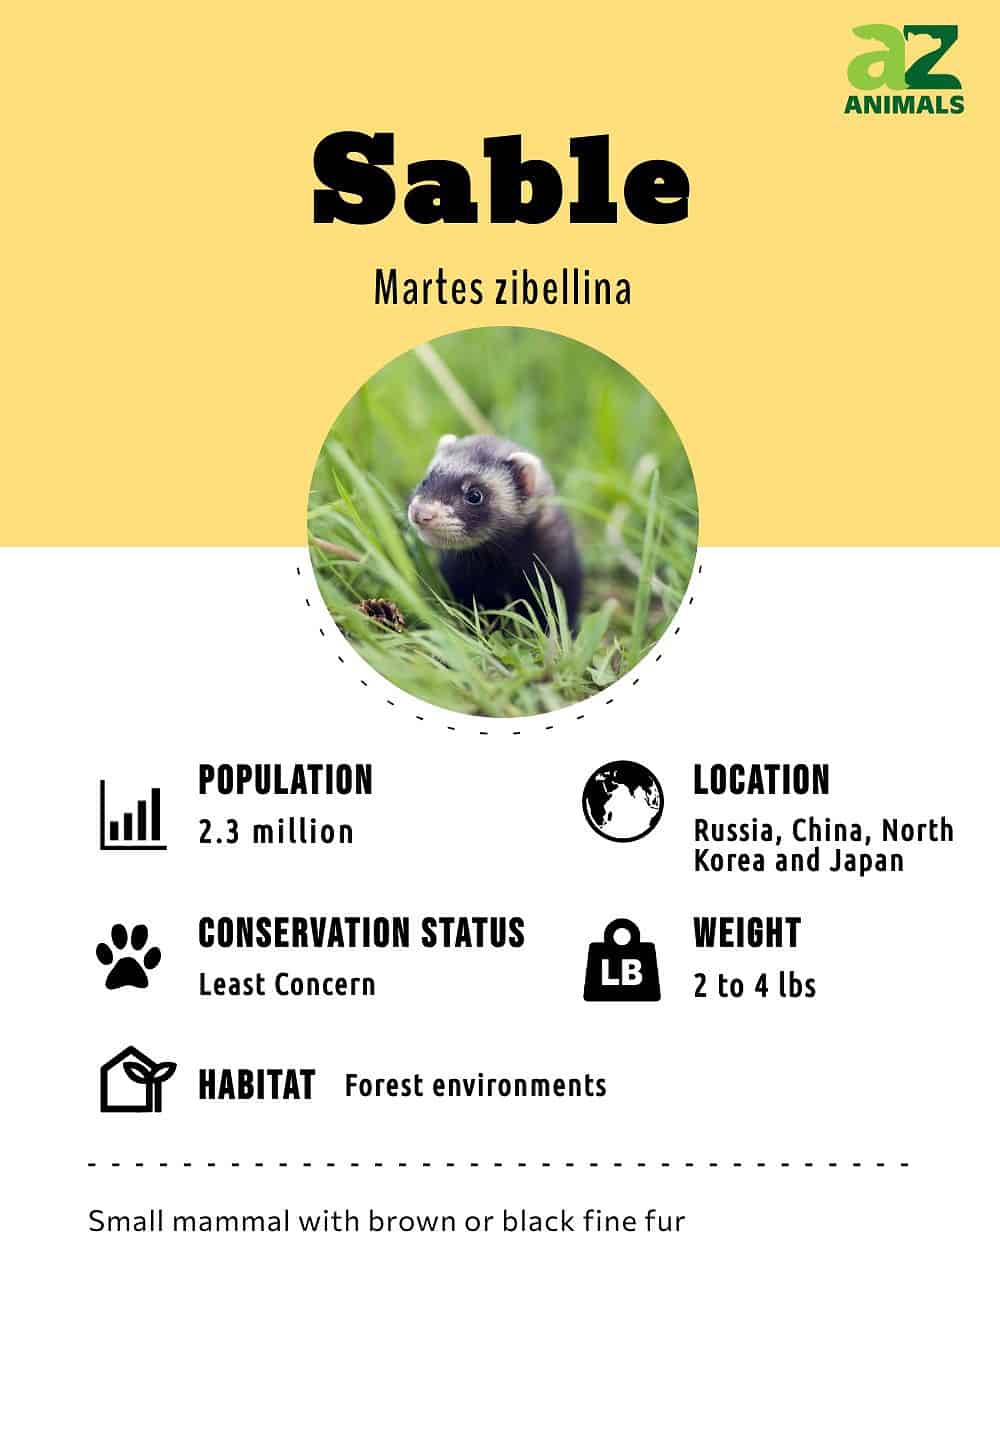 Sable - Facts, Diet, Habitat & Pictures on